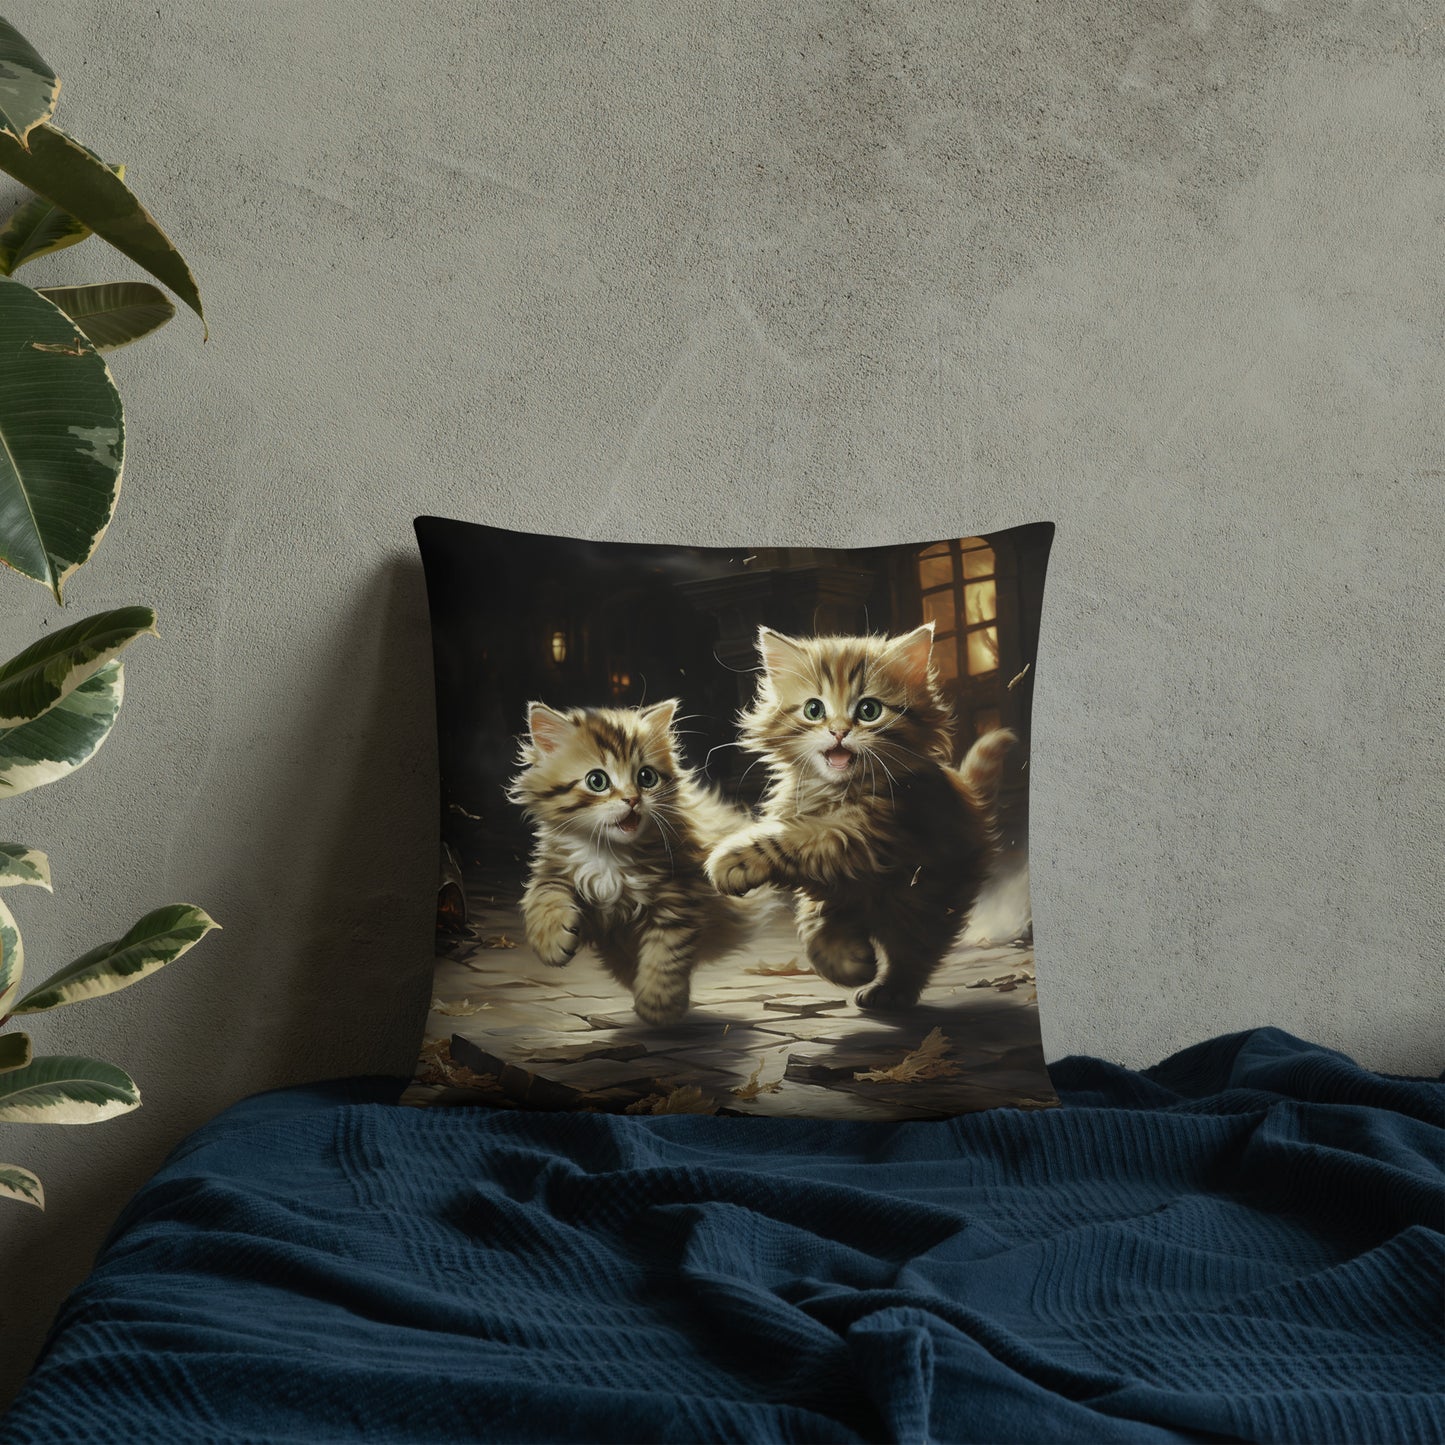 Cat Throw Pillow Stormy Frolic Fairytale Kittens Polyester Decorative Cushion 18x18